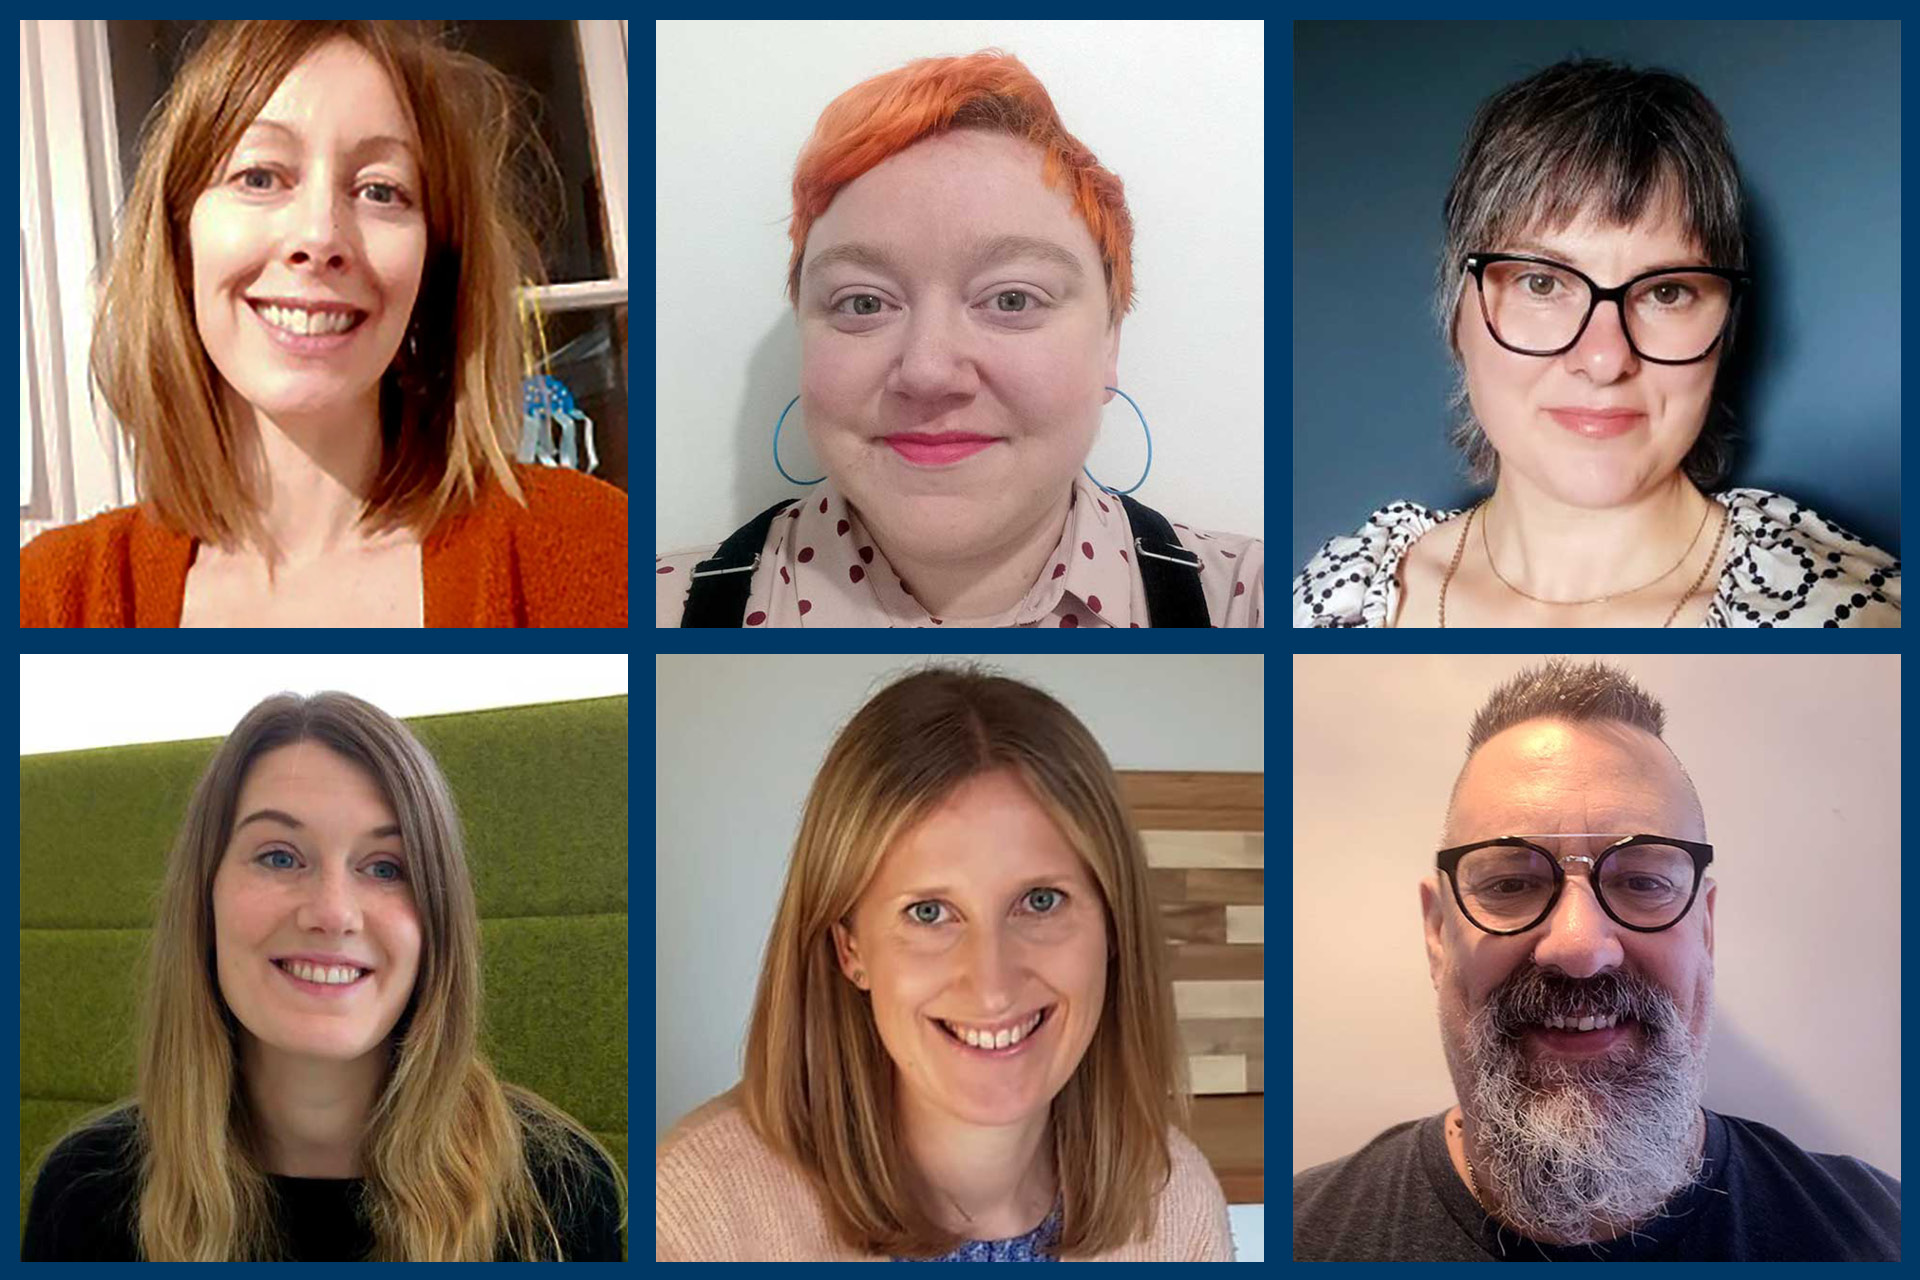 Your liaison librarians (from left to right): Emma Mires Richards, Holly Callaghan, Sarah Field, Emma Furderer, Katie Edwards, Andy Prue